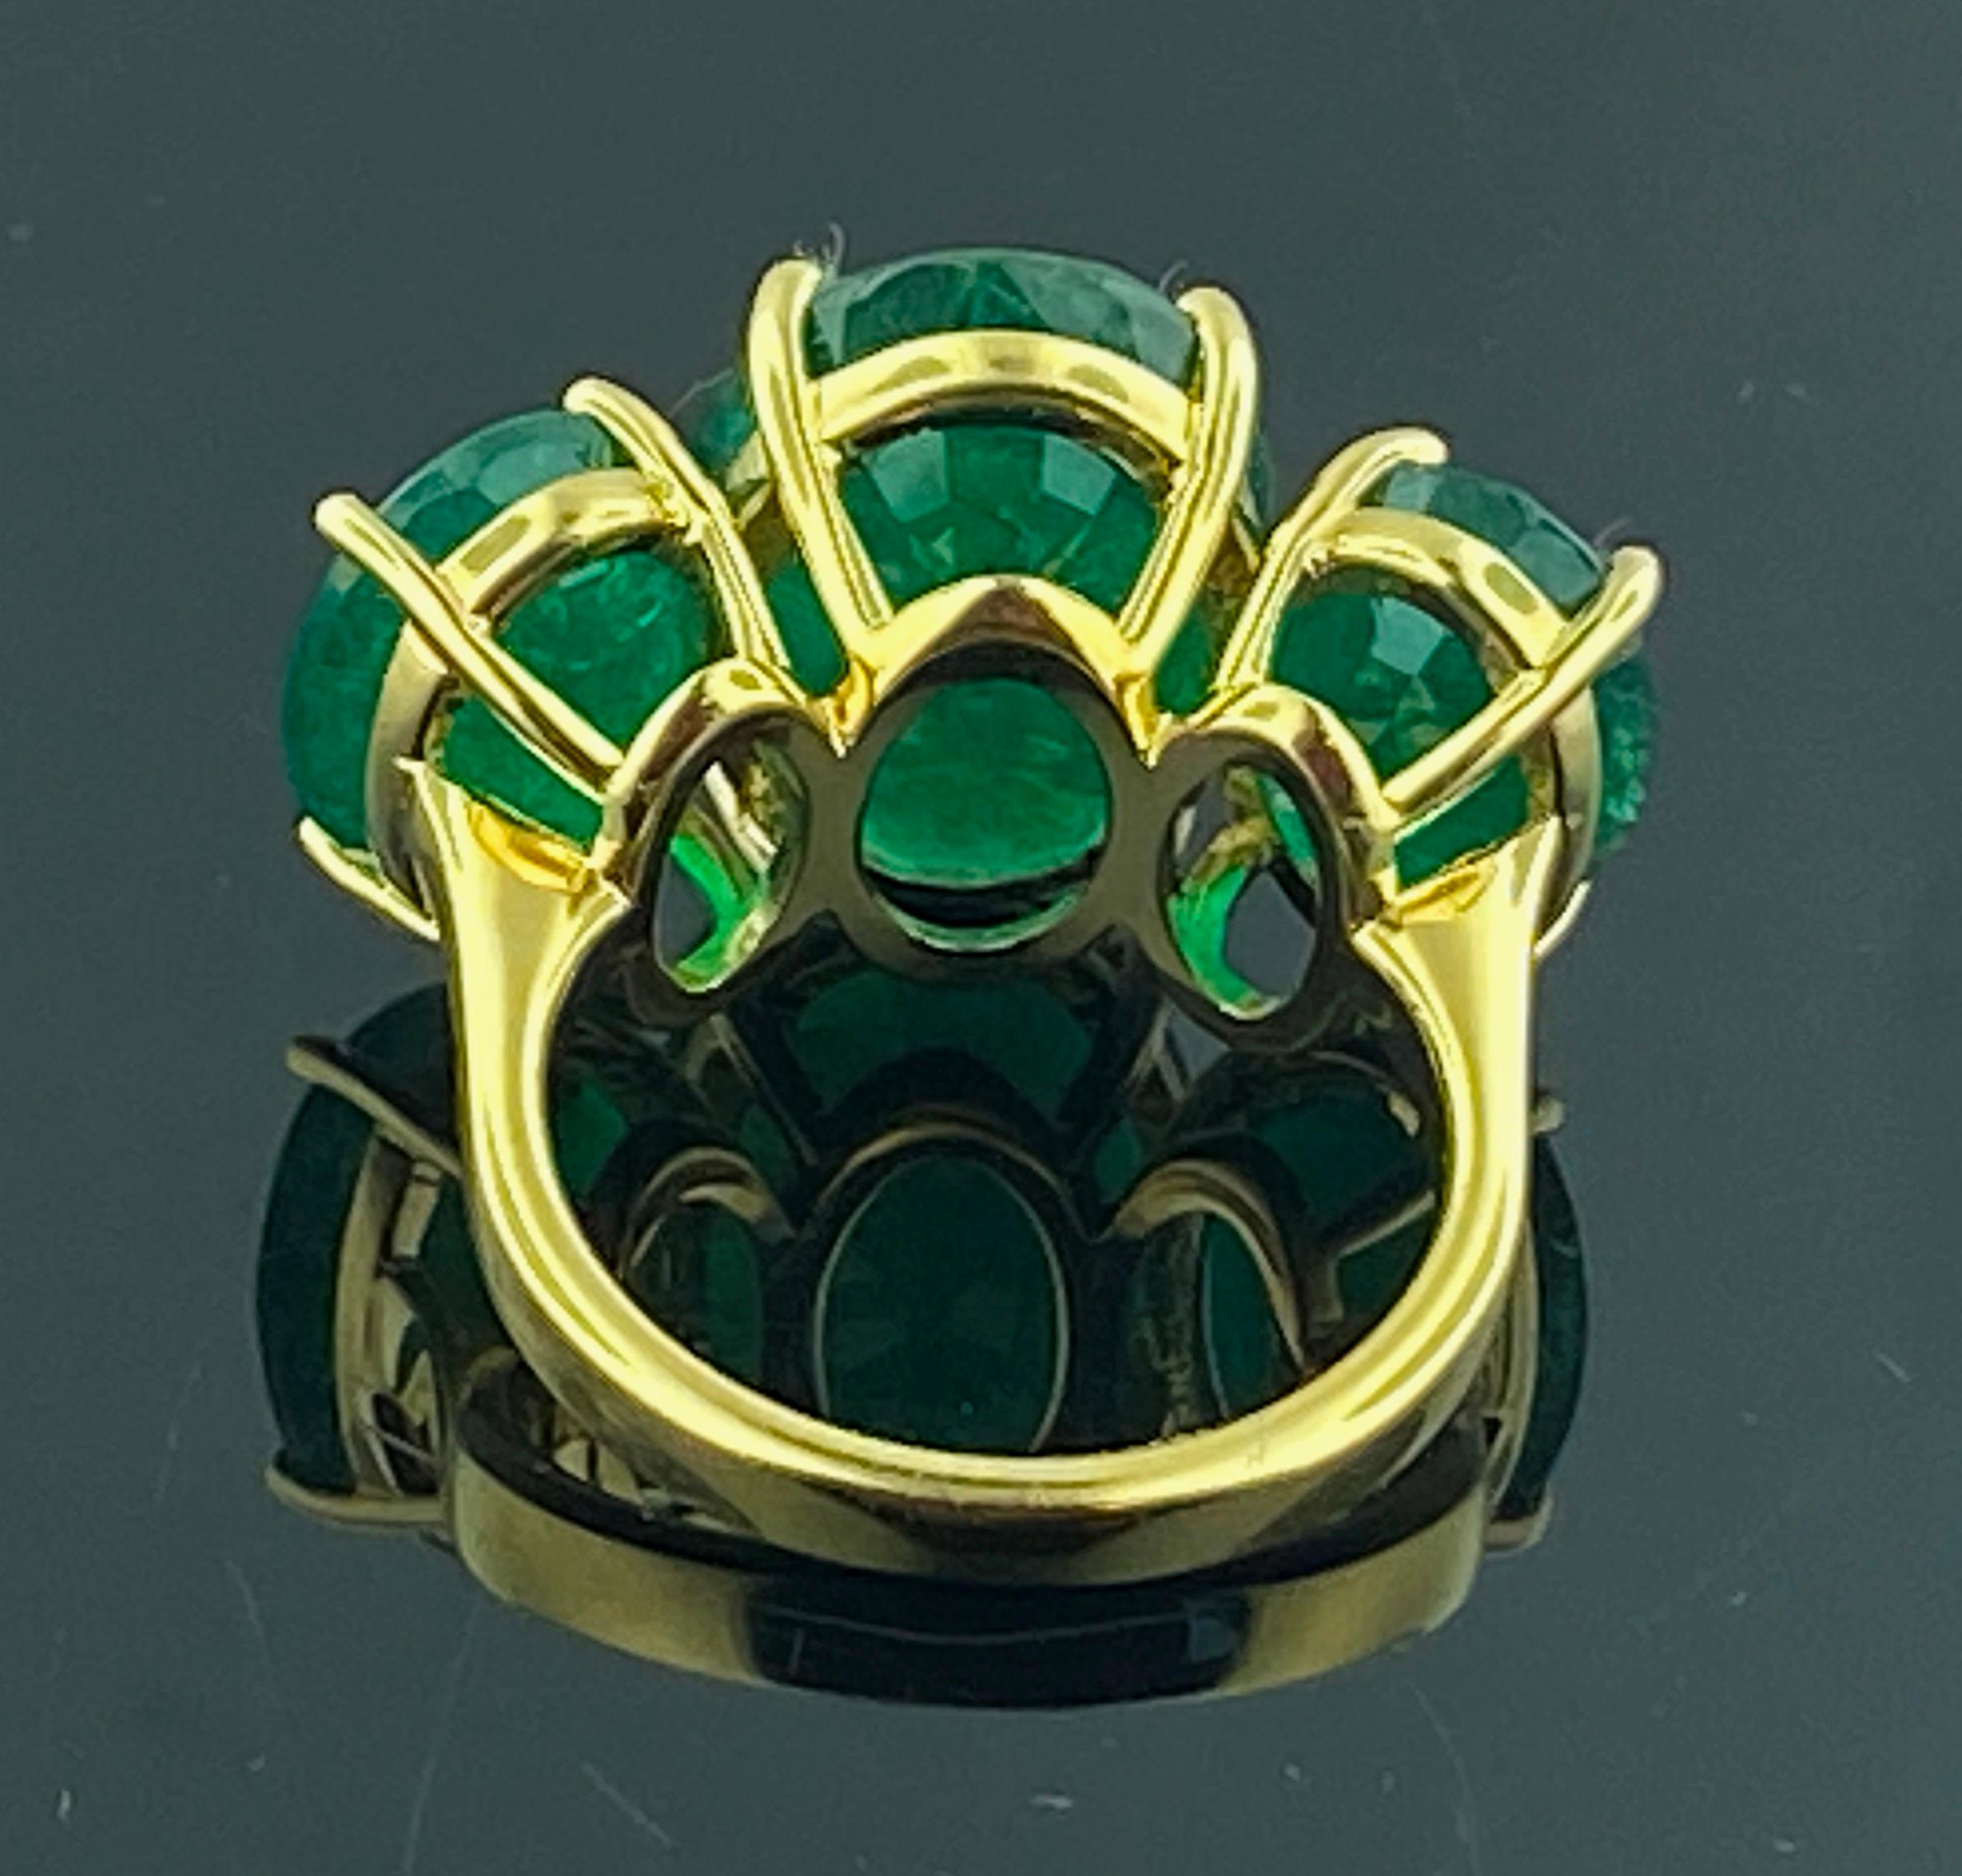 Set in 18 karat yellow gold, weighing 9 grams, are three Oval Cut Emeralds.  The center Emerald is 8.93 carats, the side Emeralds are 3.47 carats and 3.37 carats for a total Emerald weight of 15.77 carats total.  Ring size is 6.25.